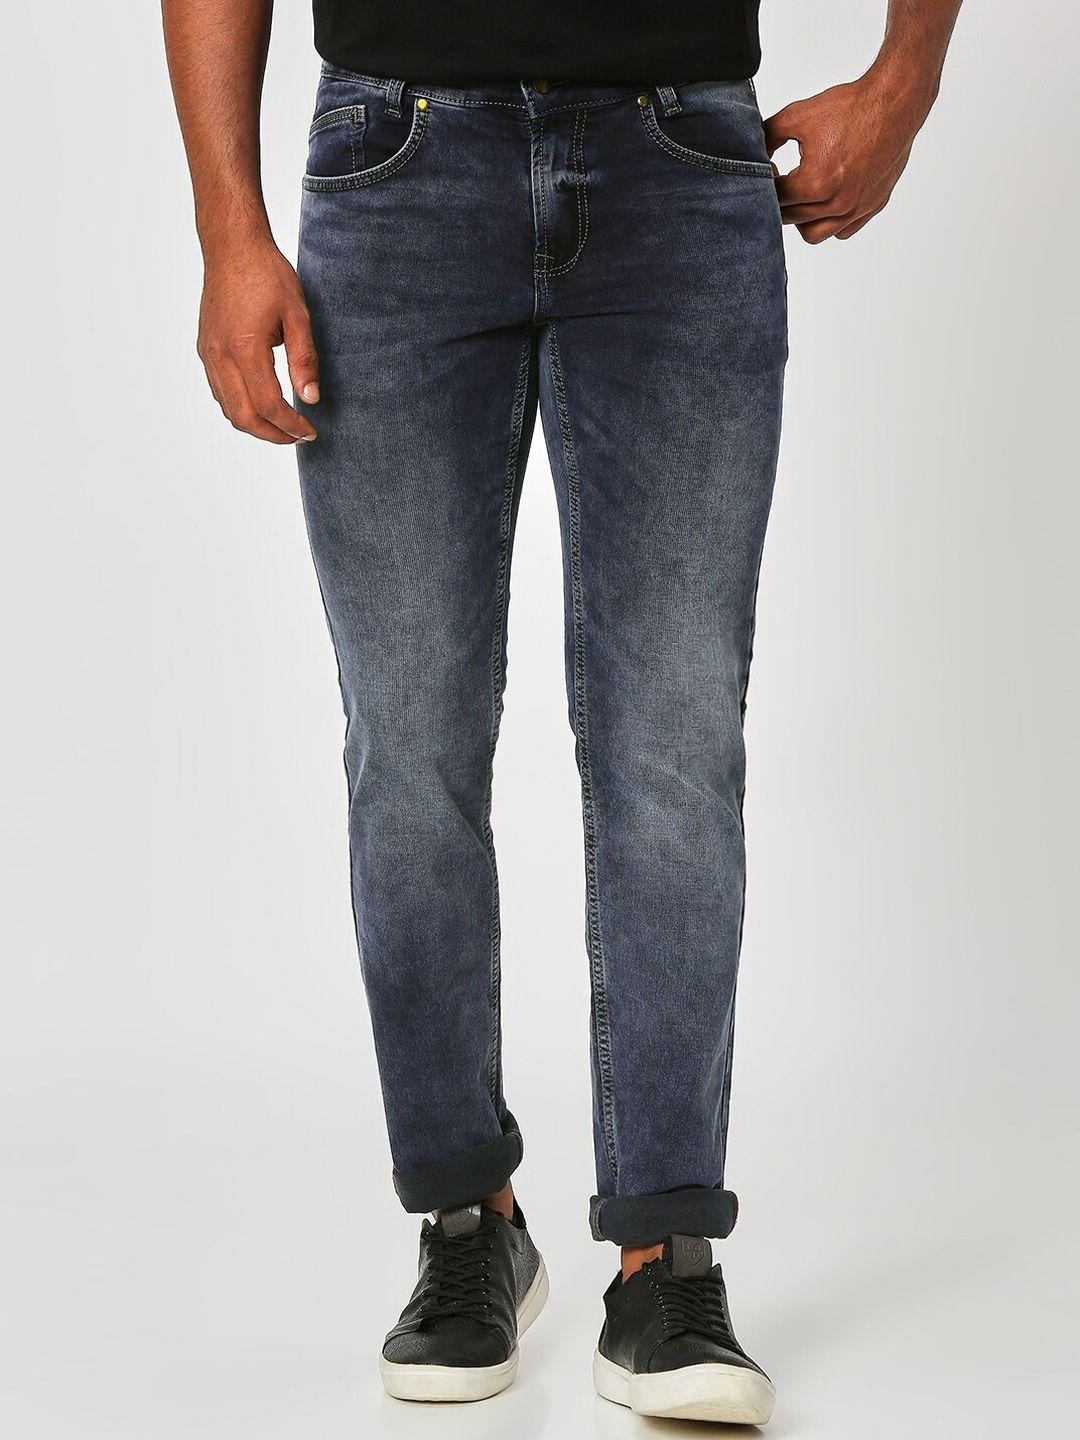 mufti-men-slim-fit-heavy-fade-stretchable-jeans